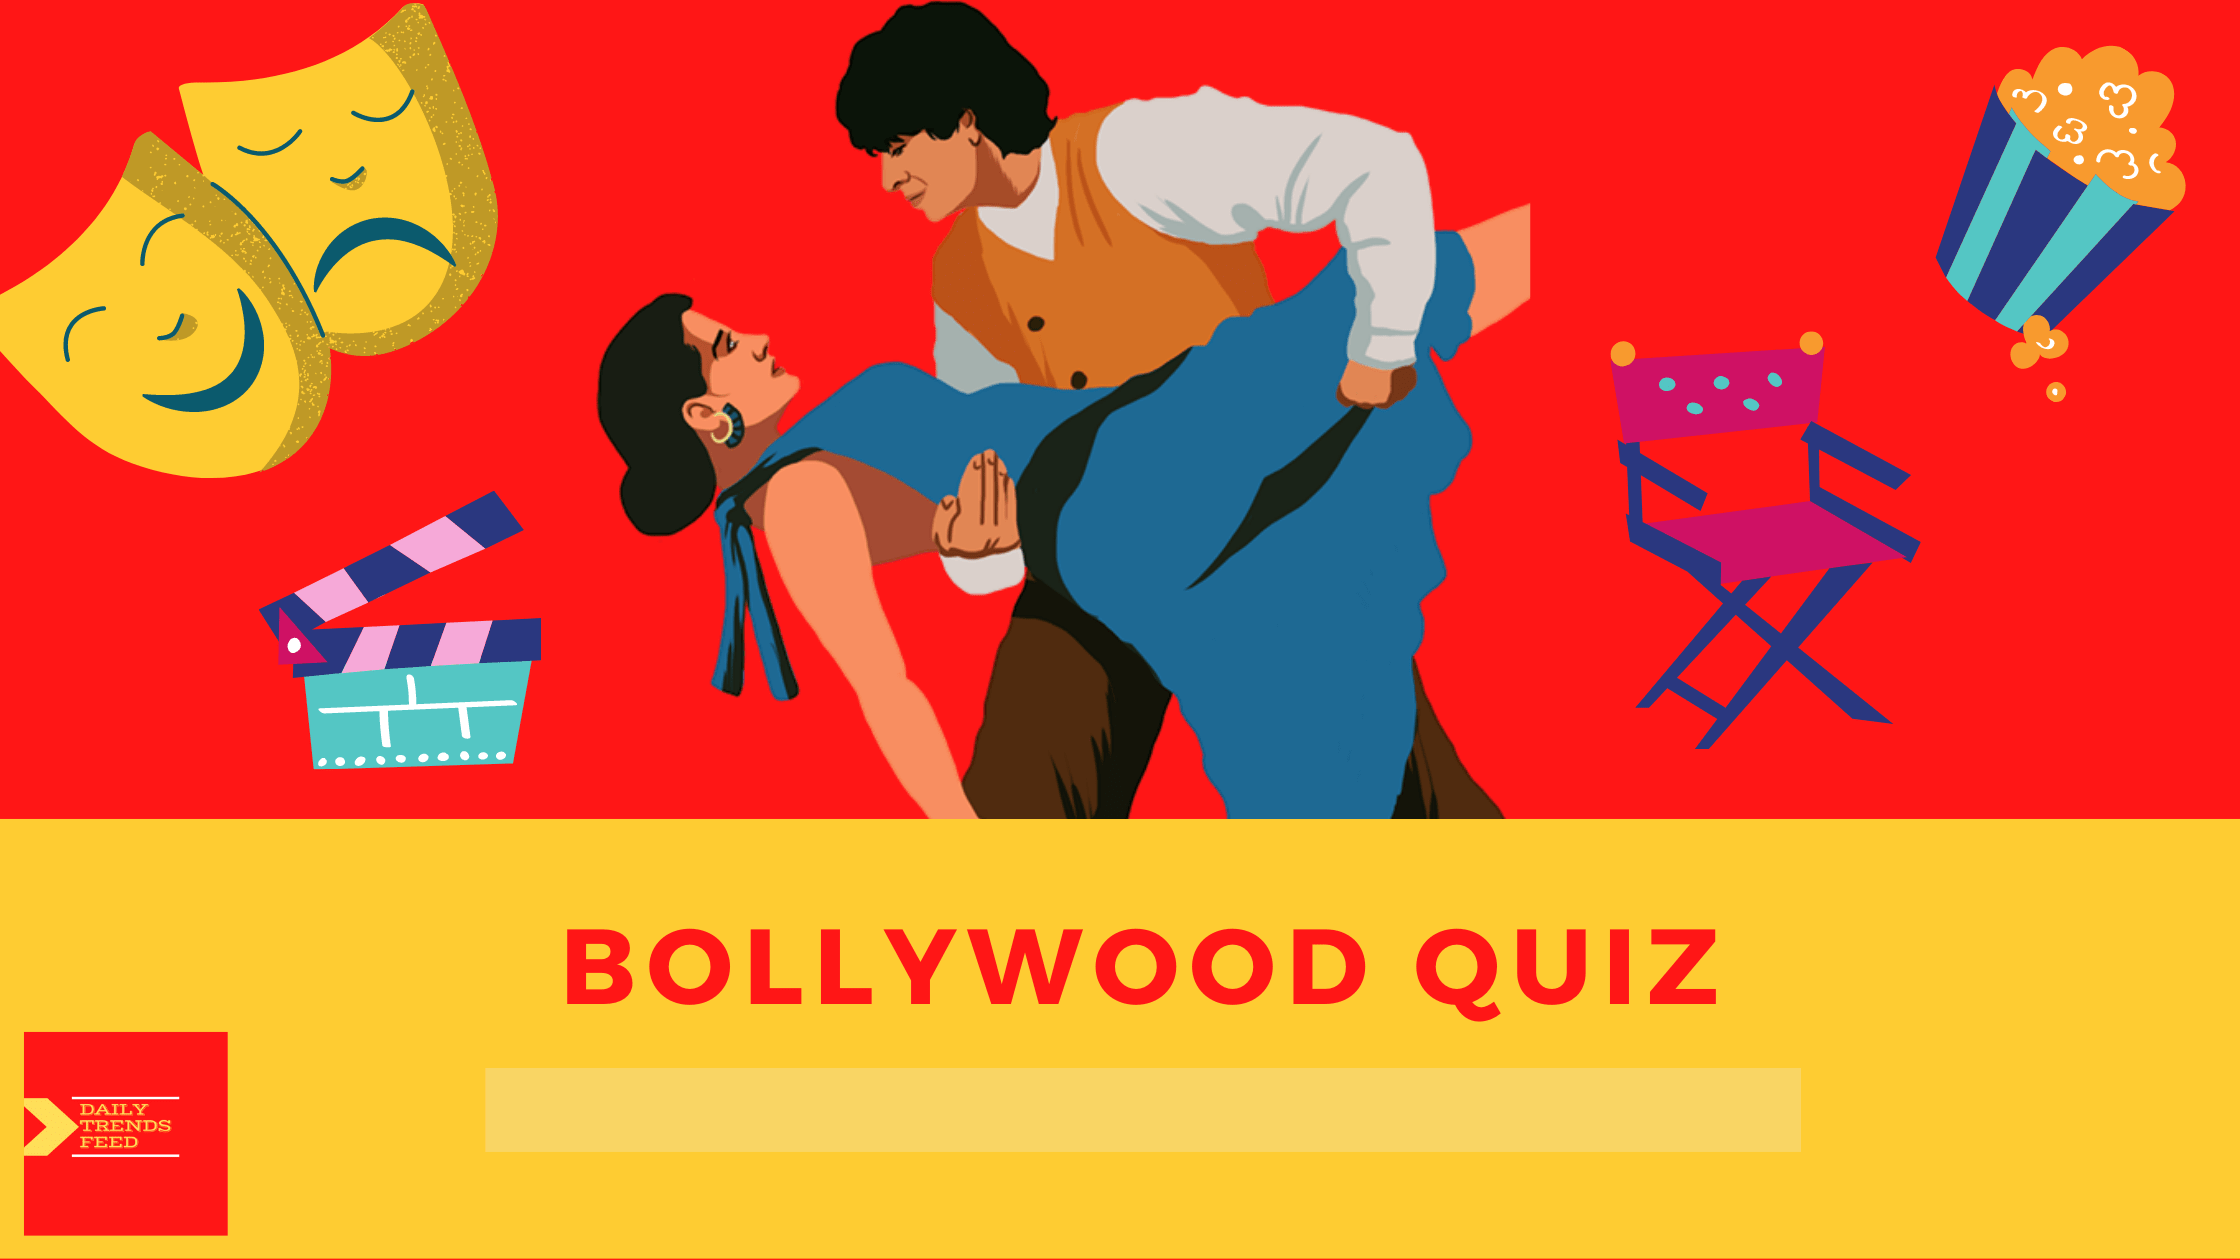 BOLLYWOOD QUIZ: Can You Guess These Films From The Props or Pets Images?